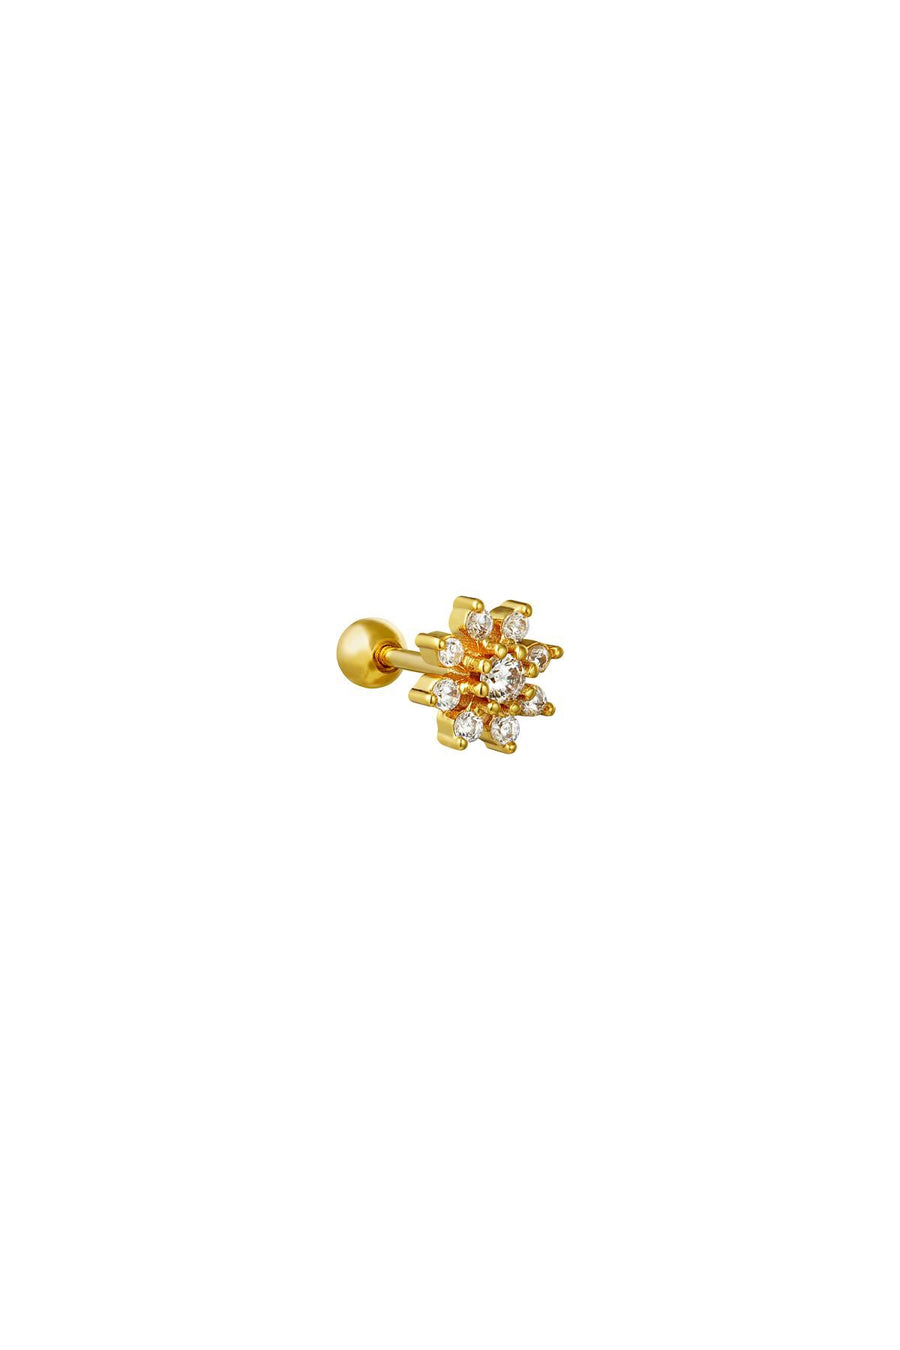 Sparkling Flower Stud - Contains one stud